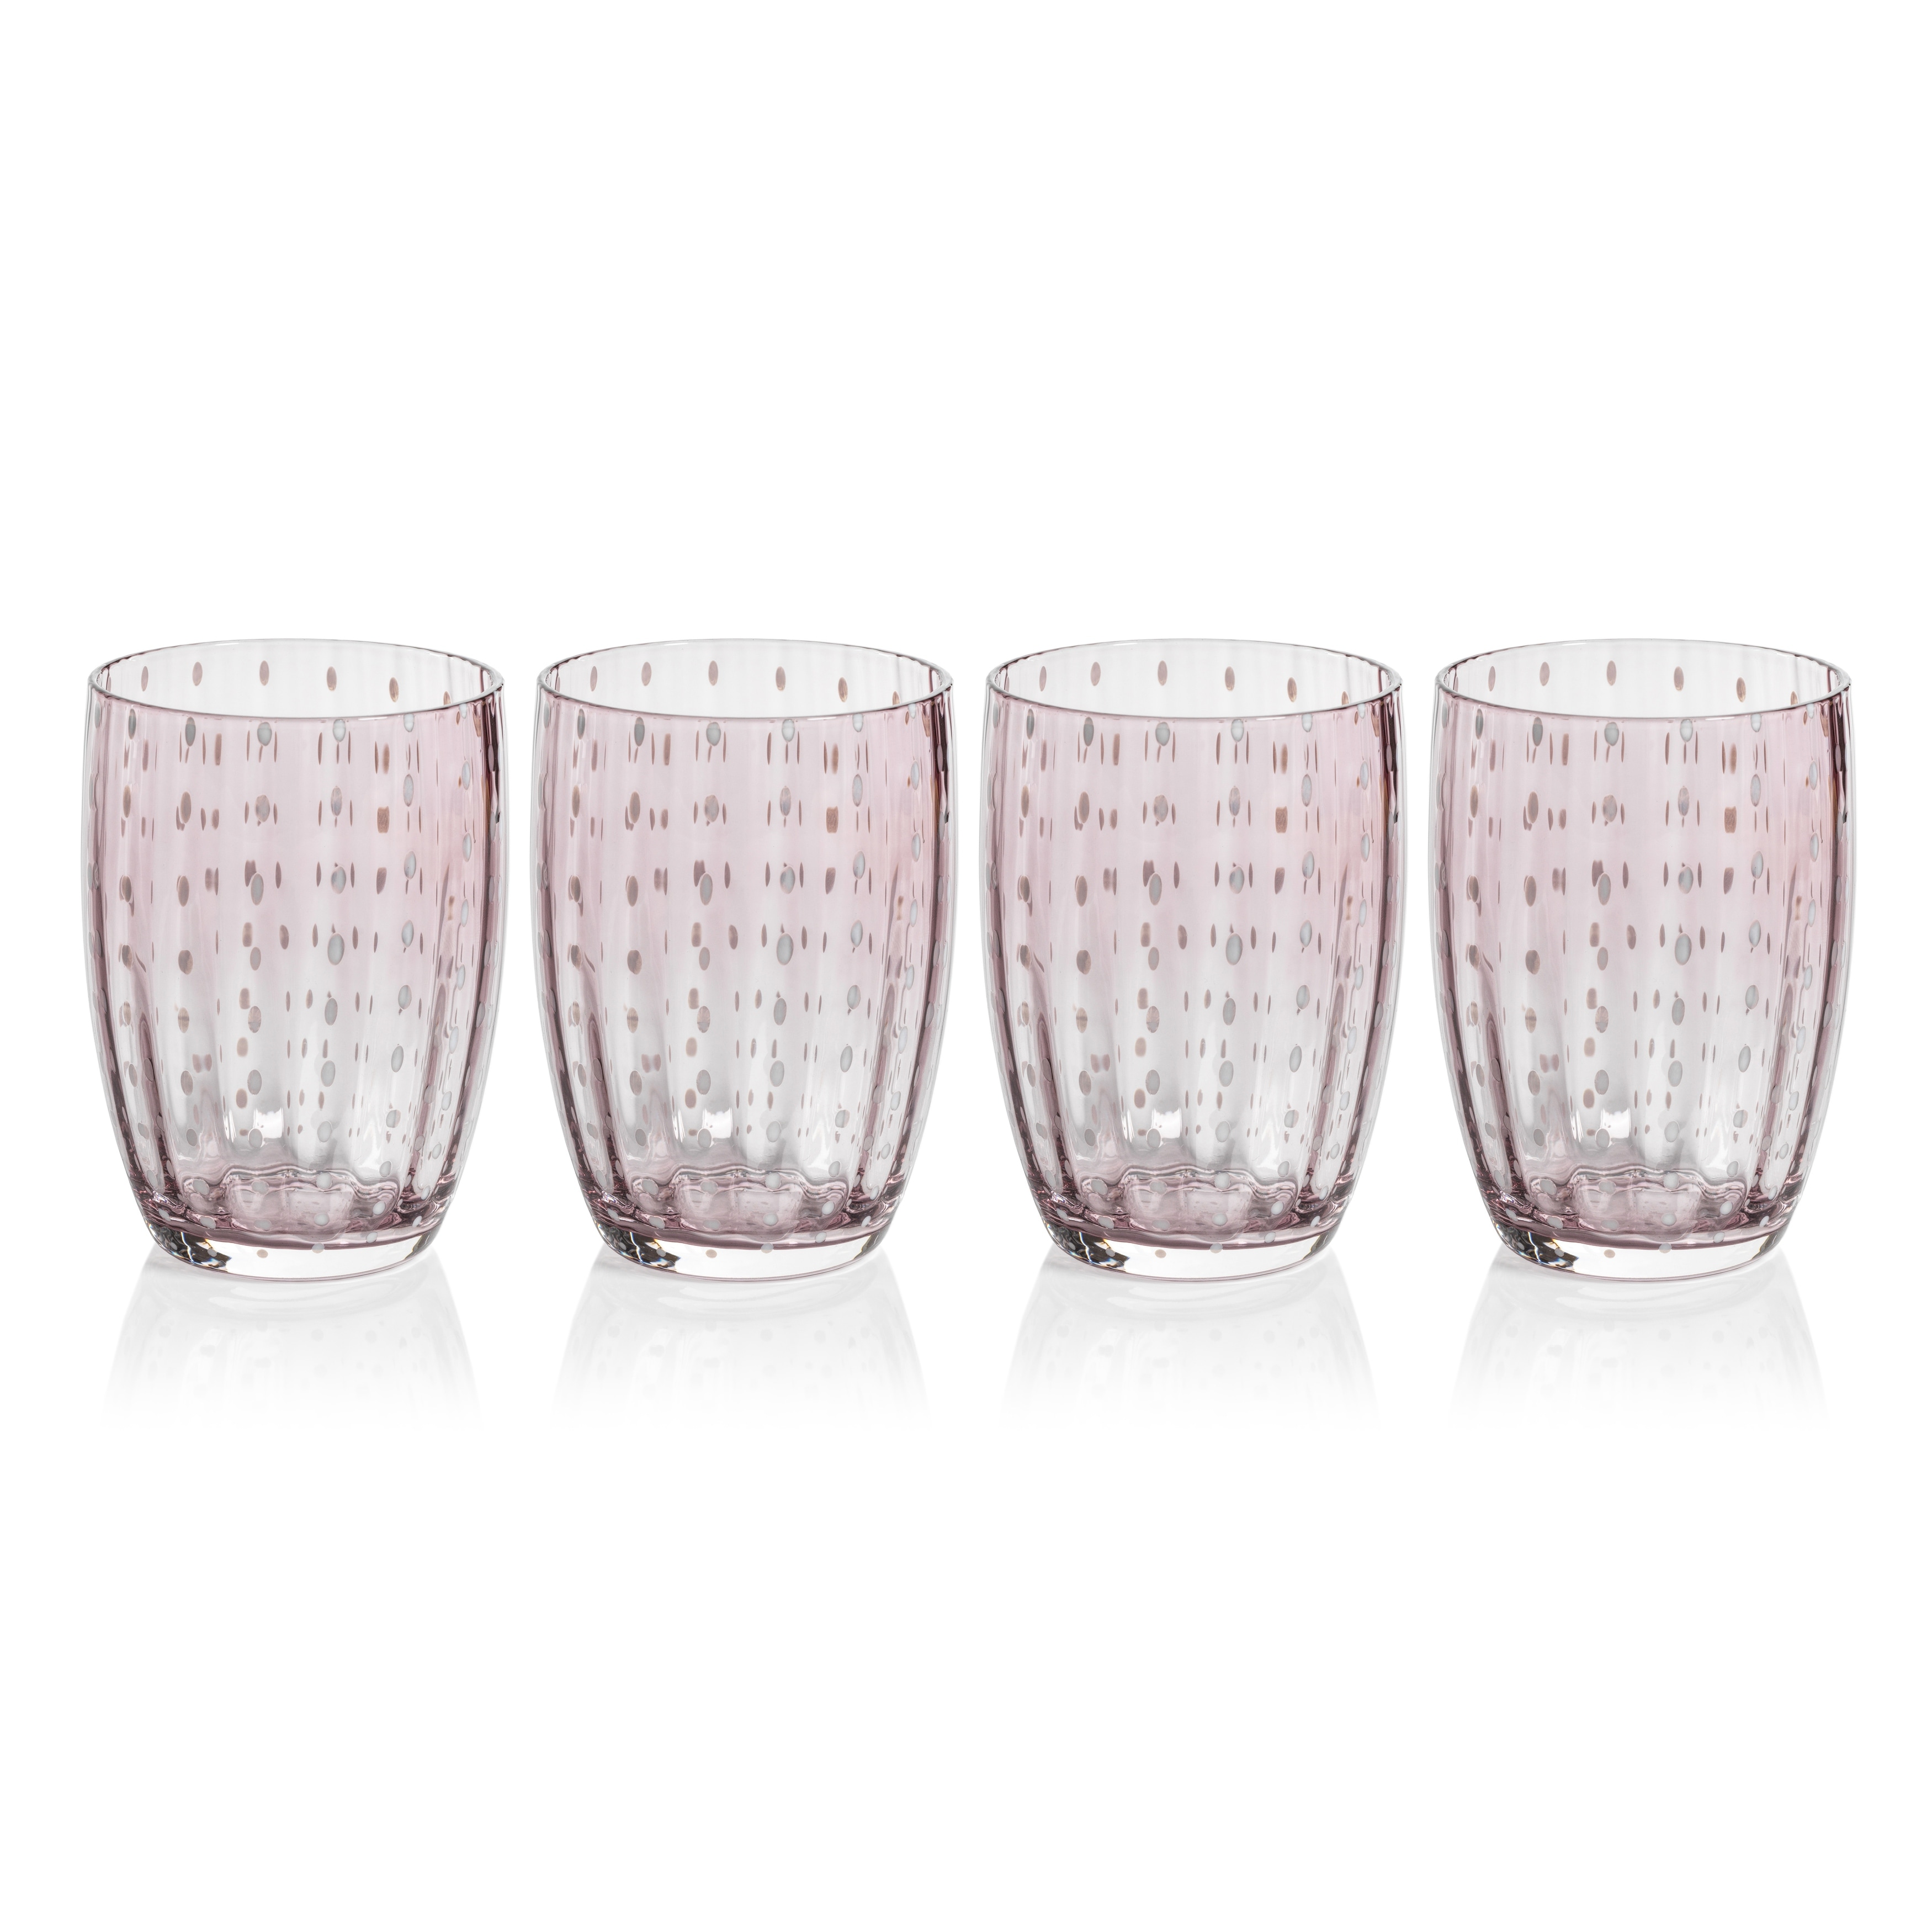 https://ak1.ostkcdn.com/images/products/is/images/direct/9d5c4c42b7a490d4ddef9aa48bdf4d6b0374caf0/Pescara-White-Dot-Tumbler-Glasses%2C-Set-of-4.jpg